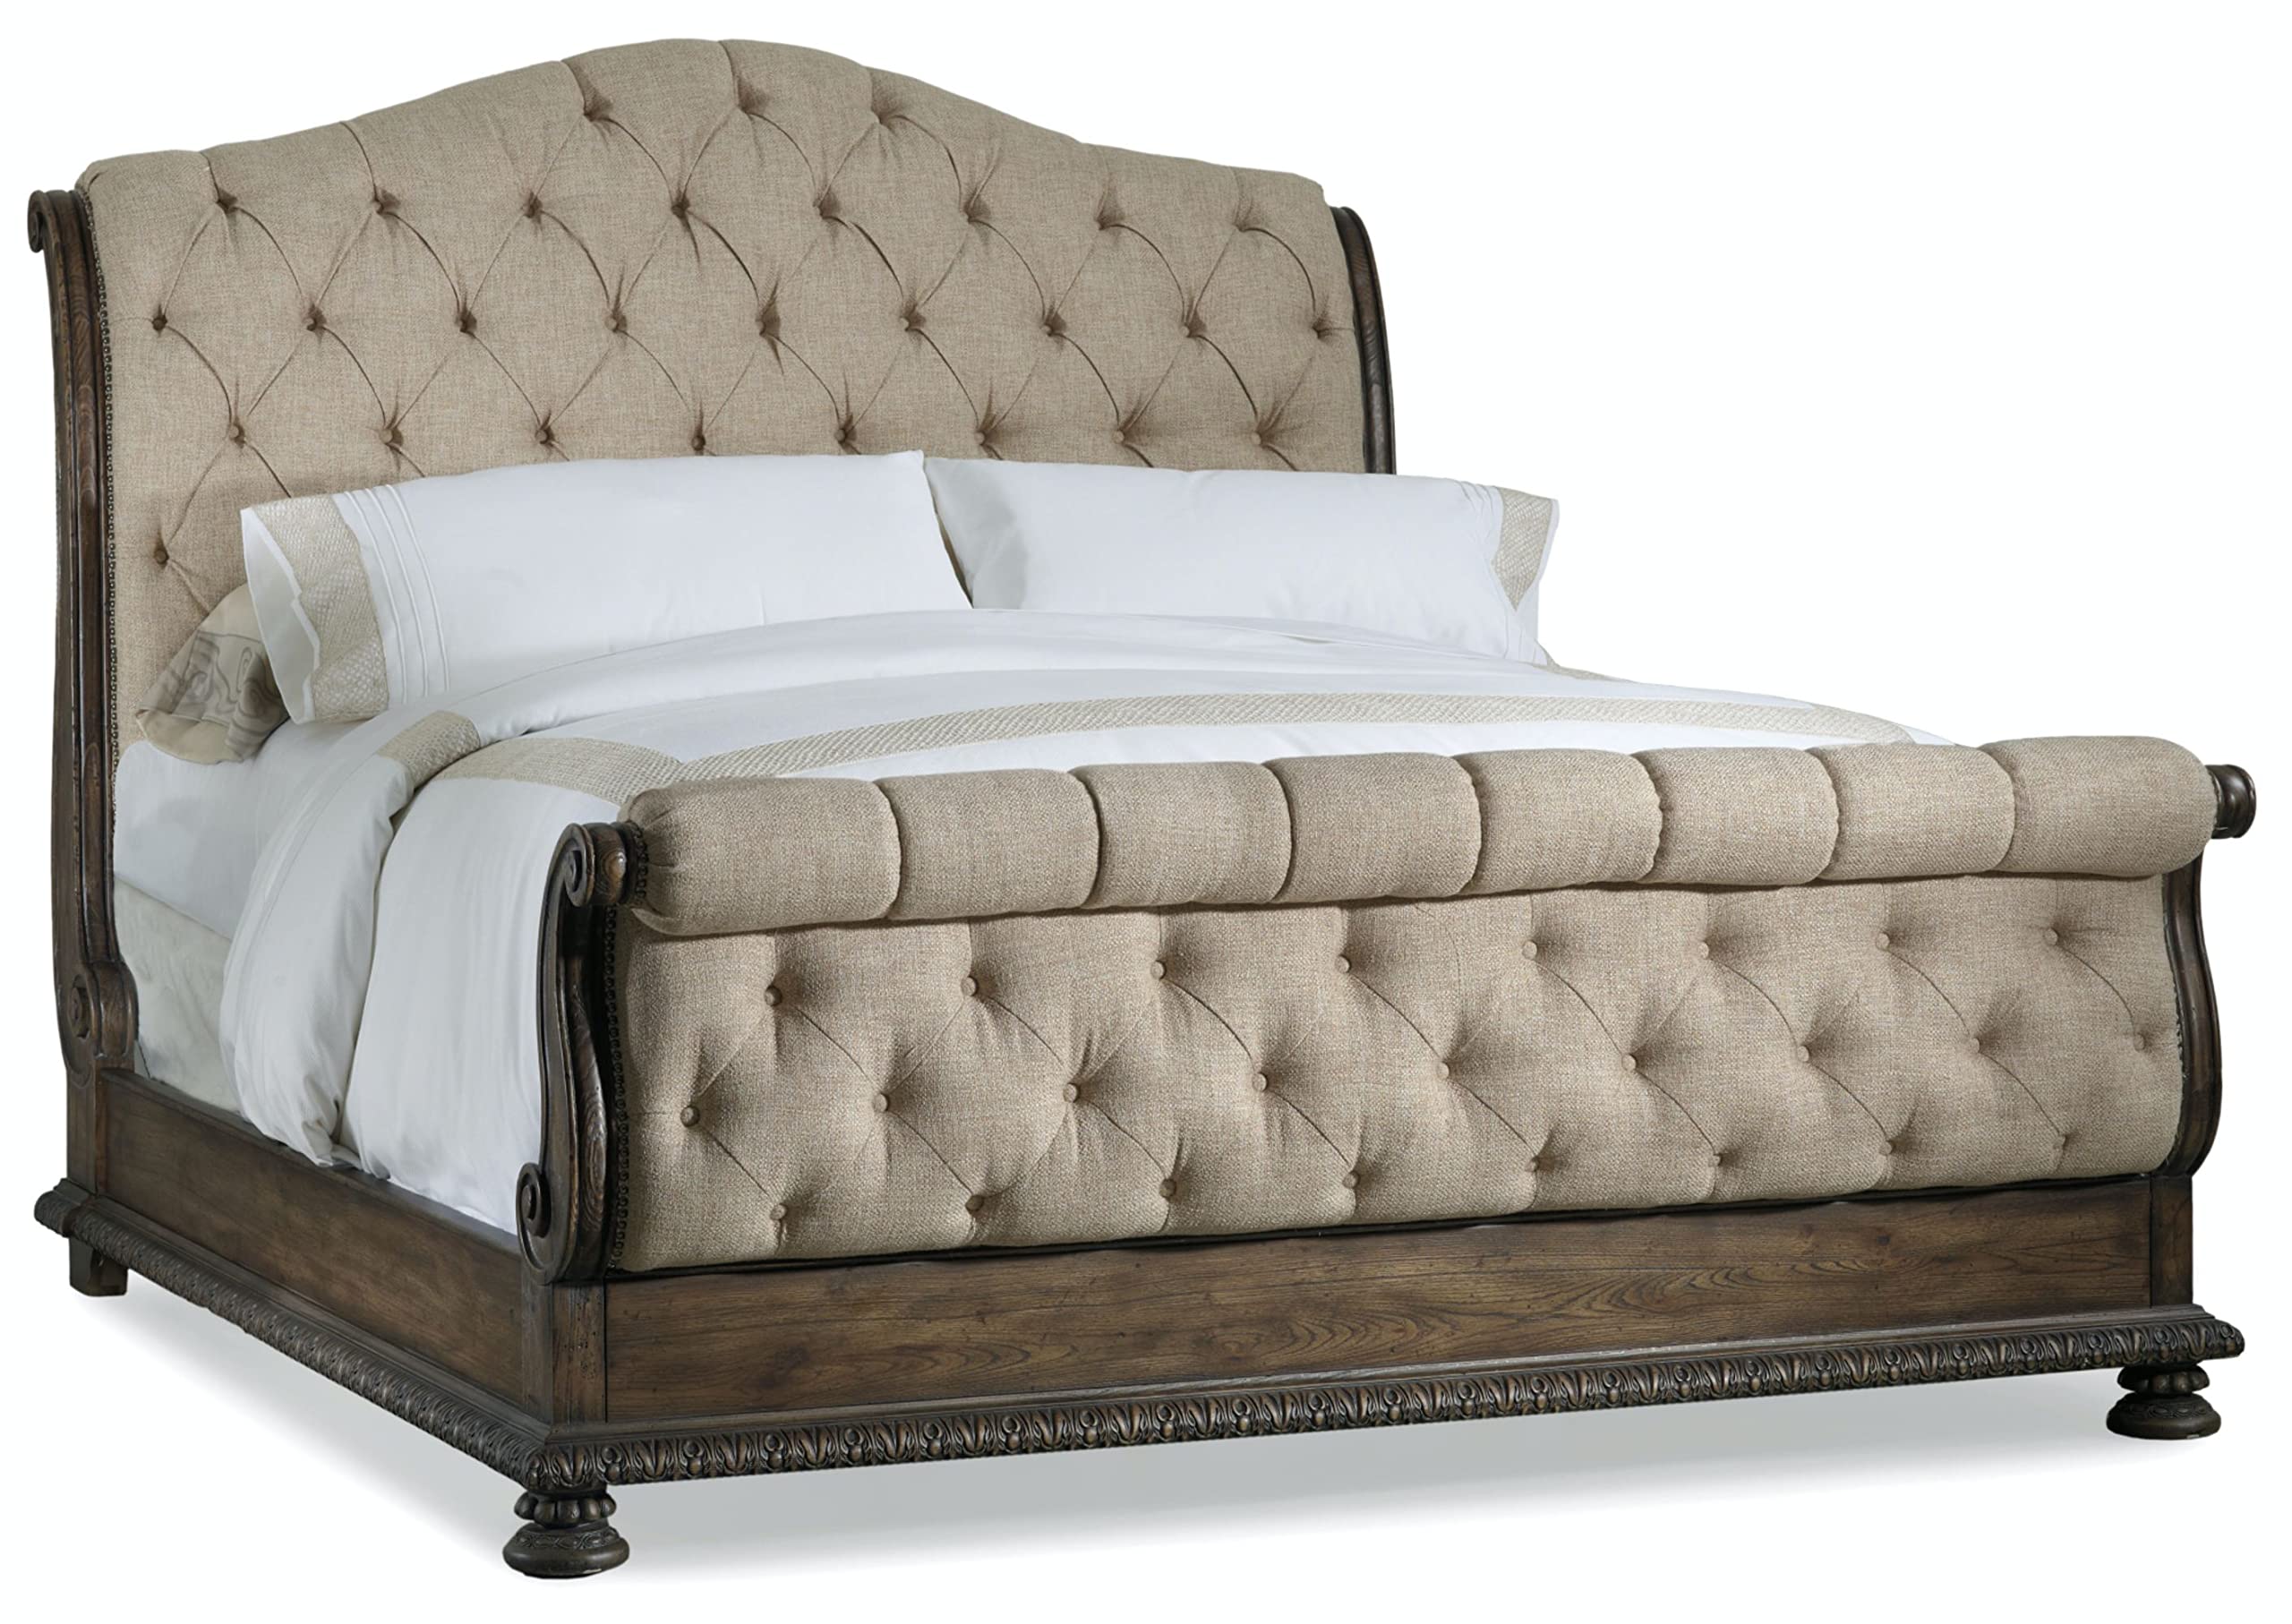 Hooker Furniture Rhapsody Tufted Upholstered Sleigh Bed